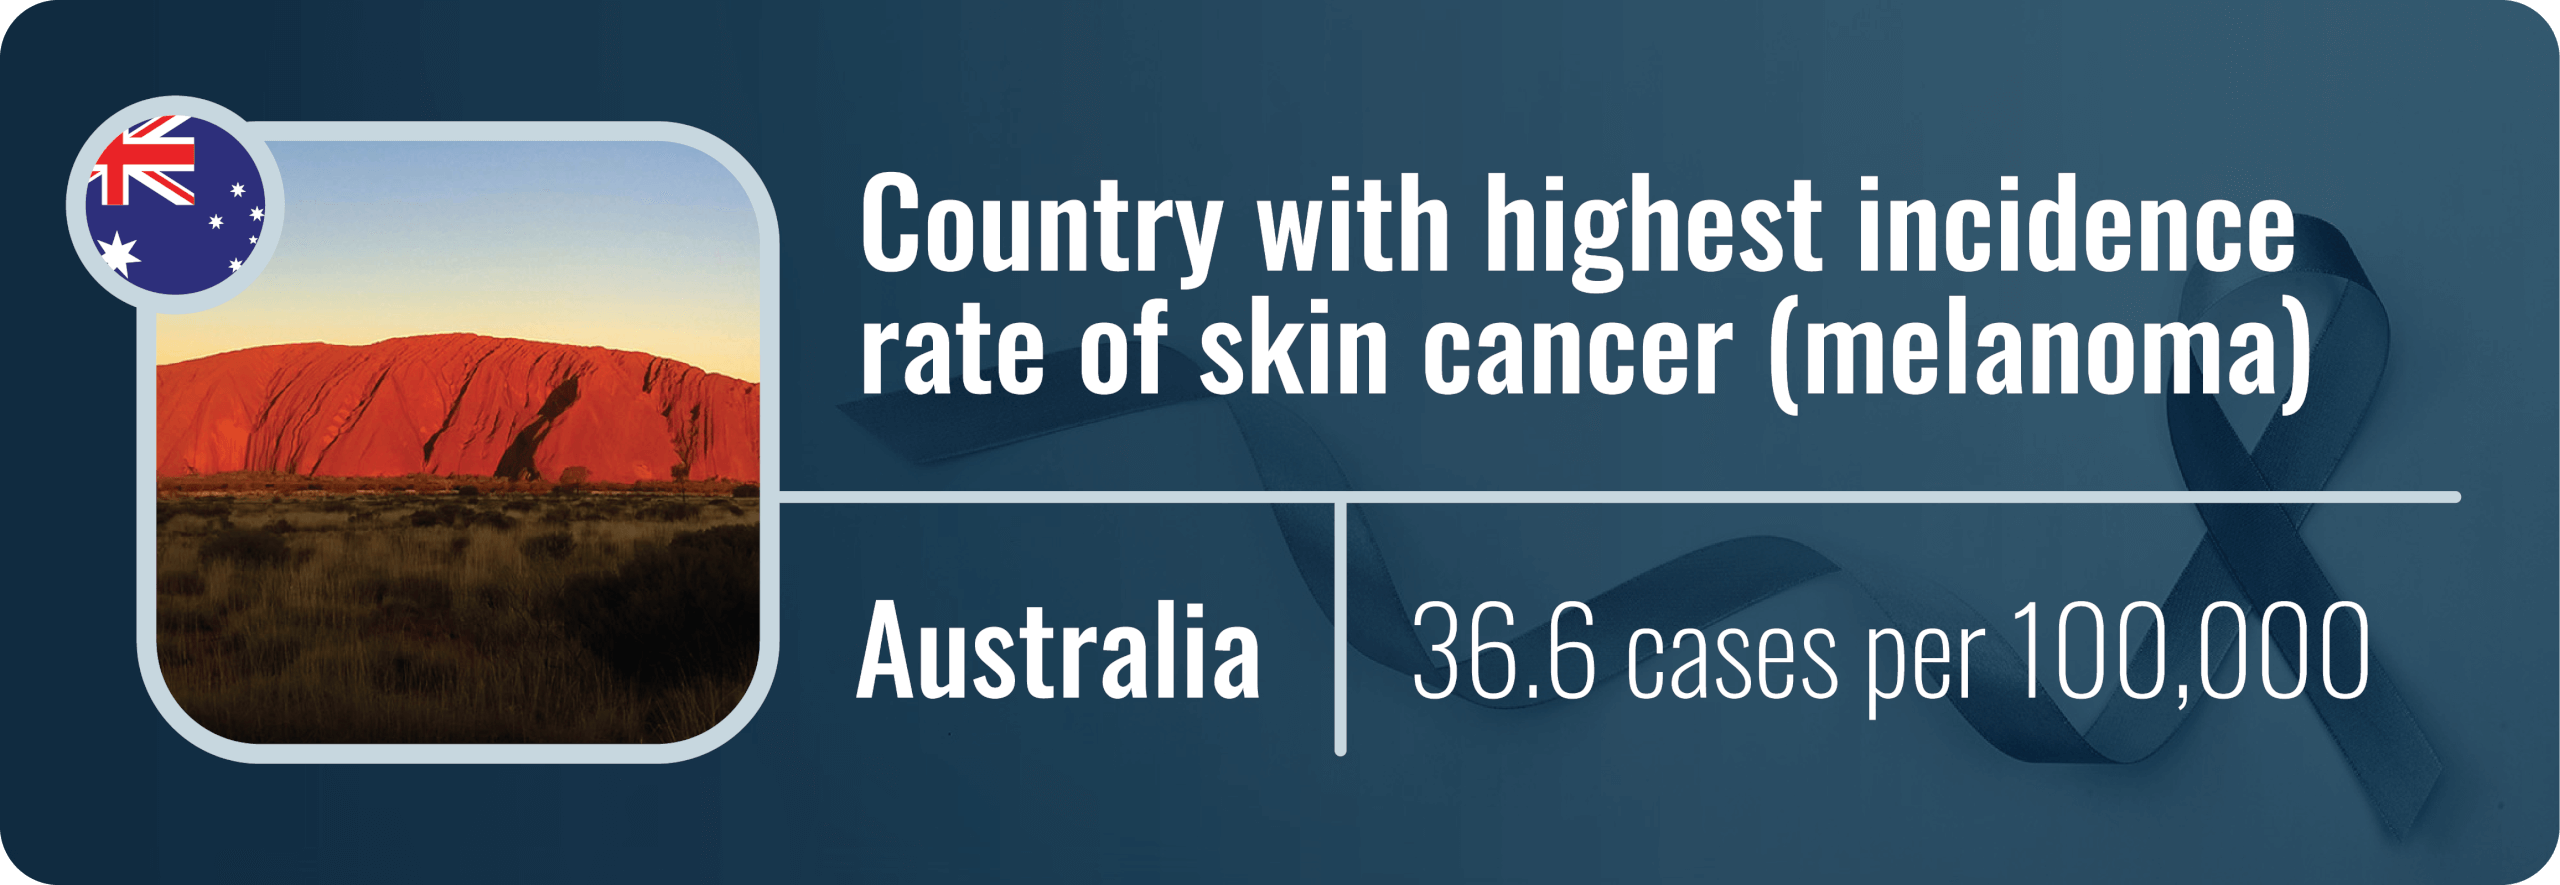 An infographic showing the country with the highest skin cancer rate